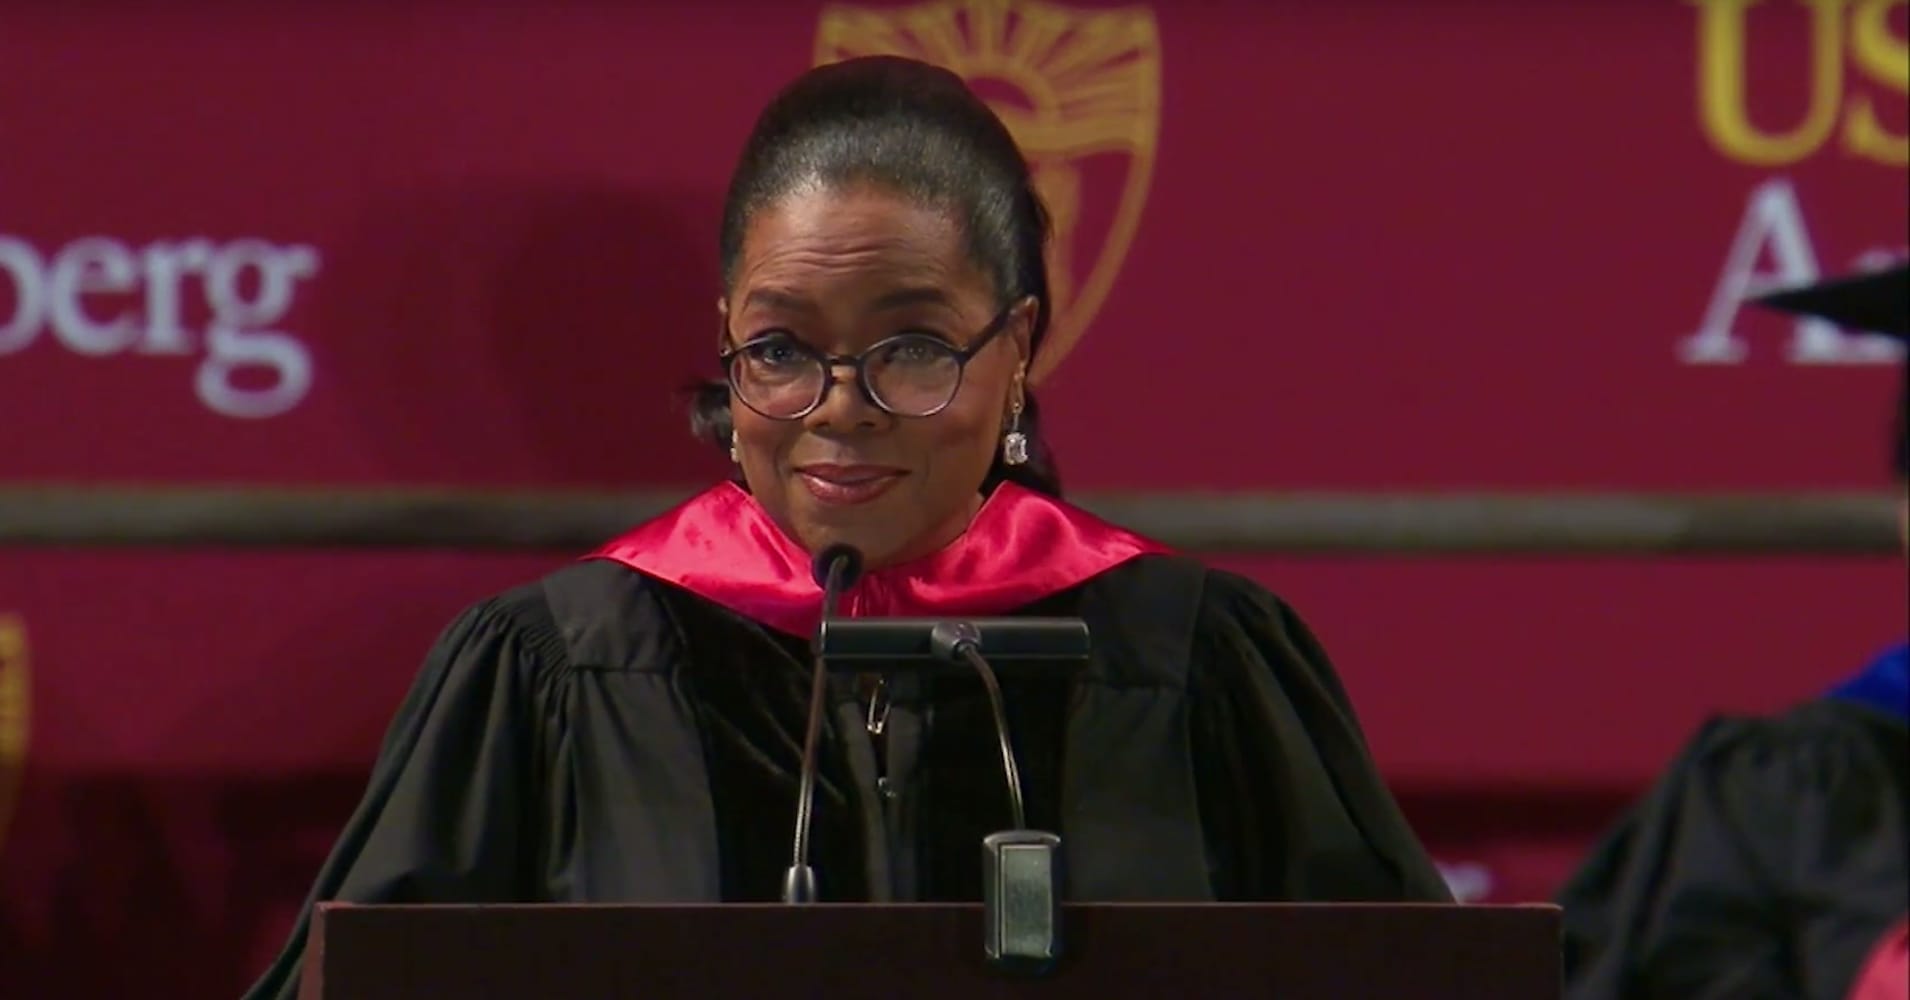 Oprah speaks at the University of Southern California